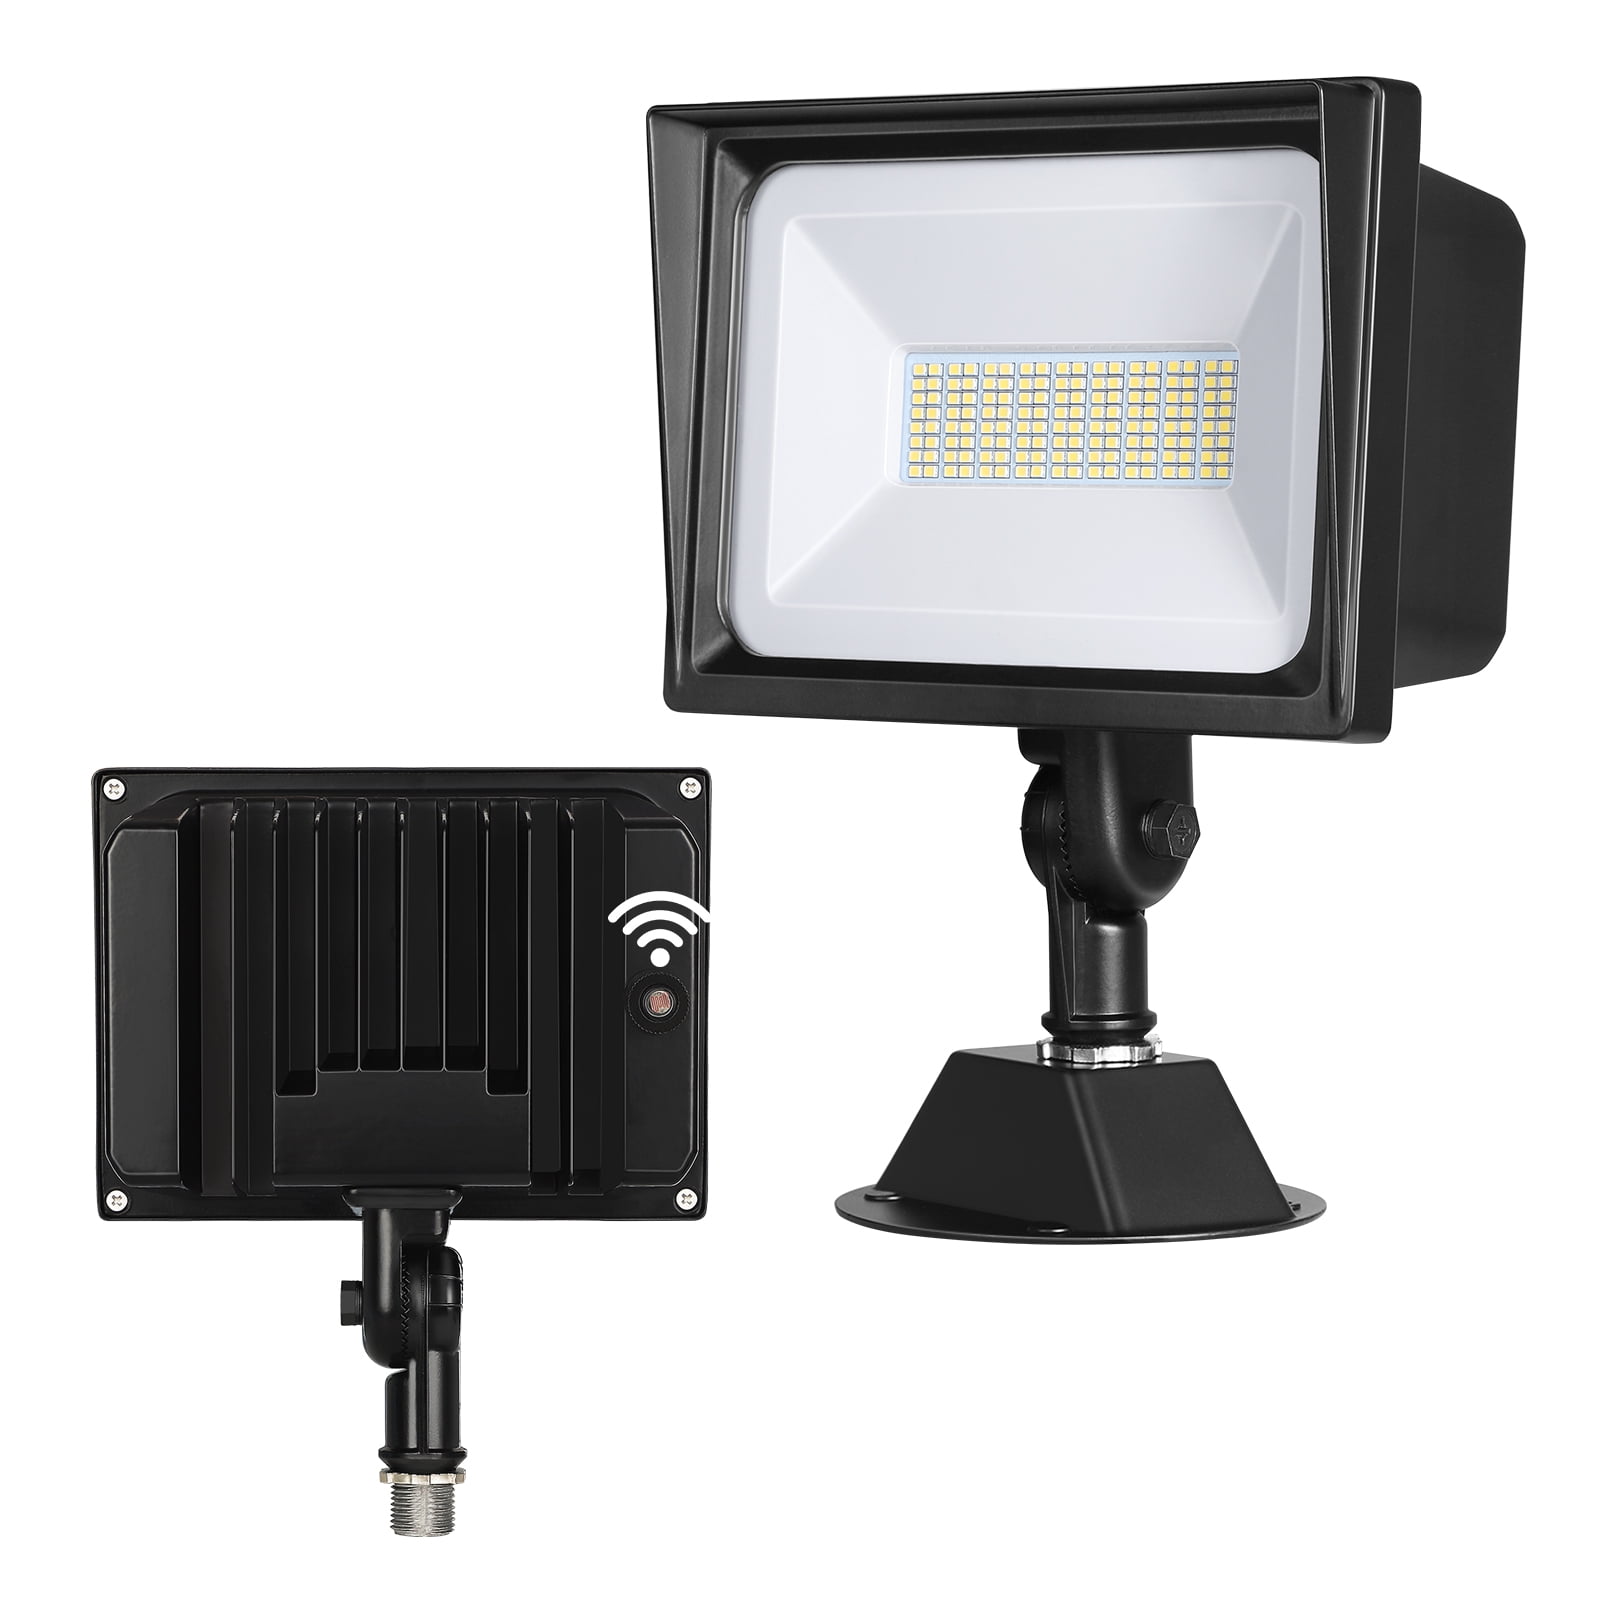 Leonlite 100W LED Outdoor Flood Light with Knuckle, 1000W Eqv 